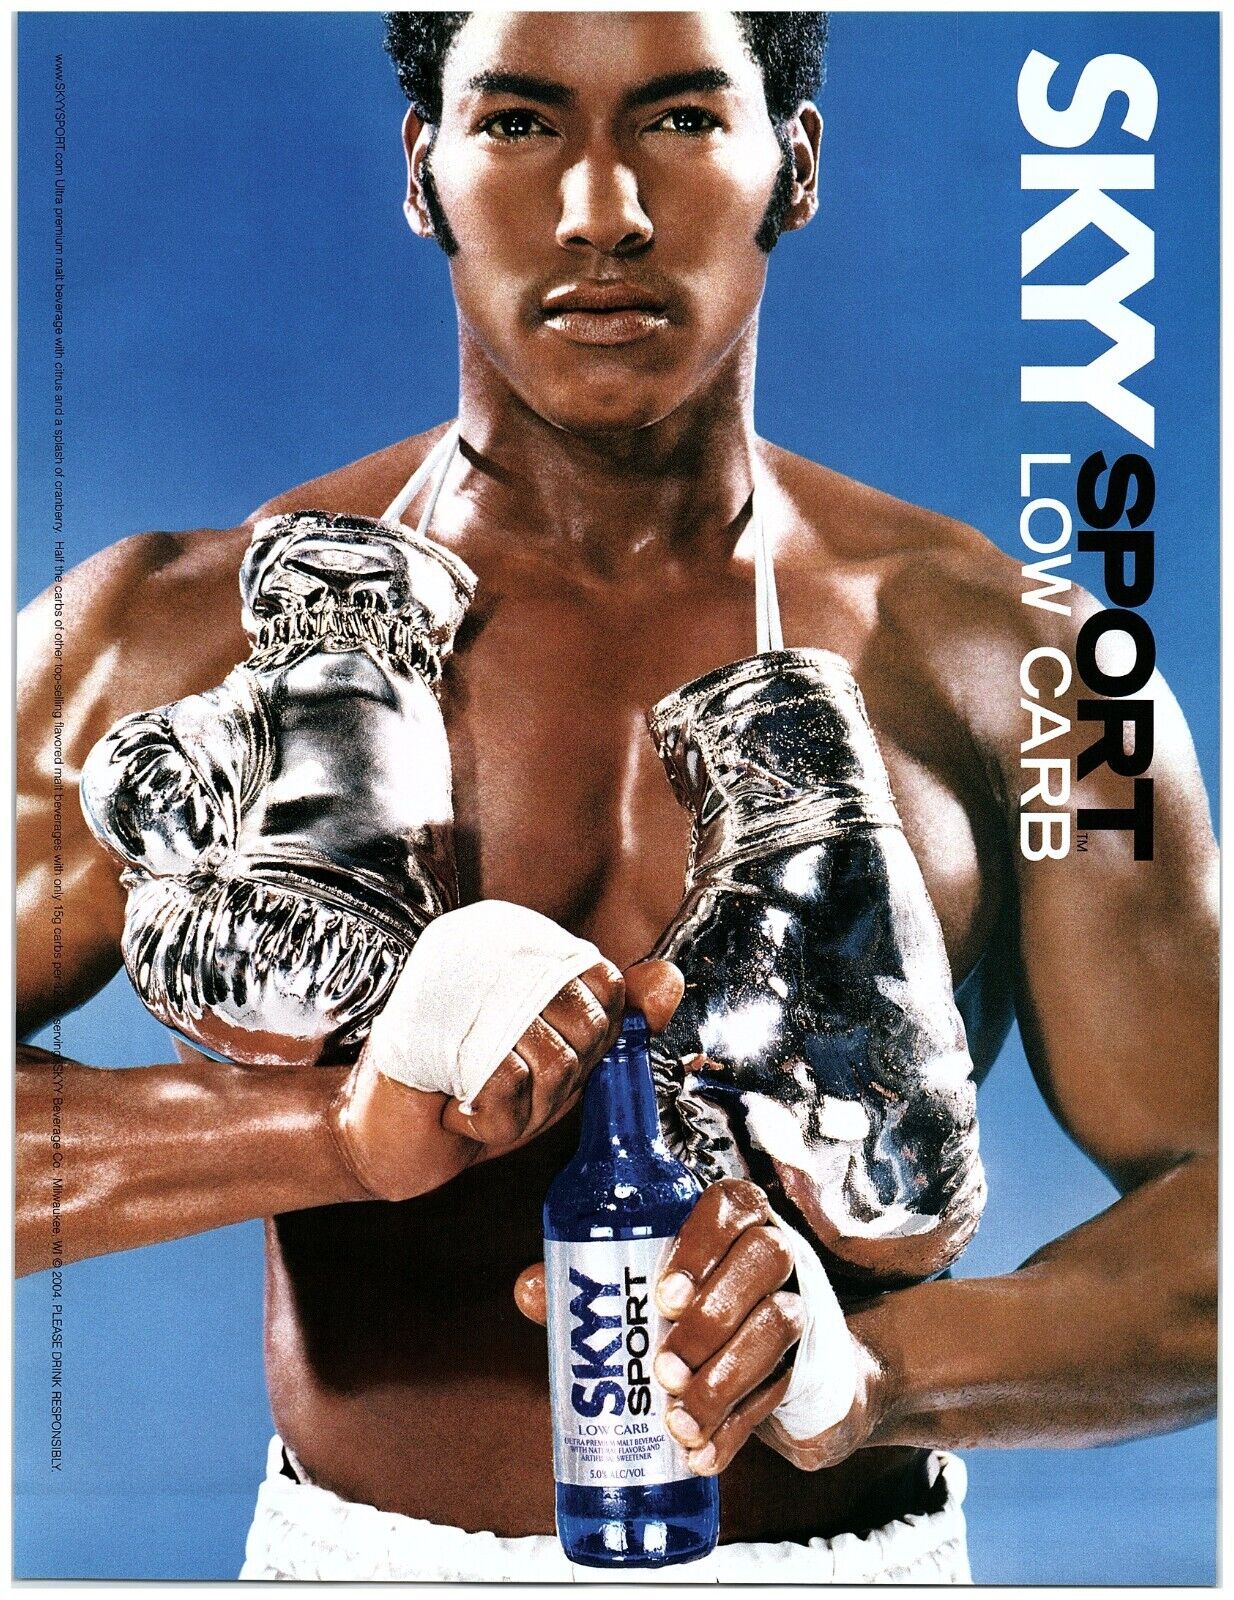 2004 Skyy Vodka Print Ad, Sport Low Carb Muscular Boxer Silver Gloves Hand Wraps